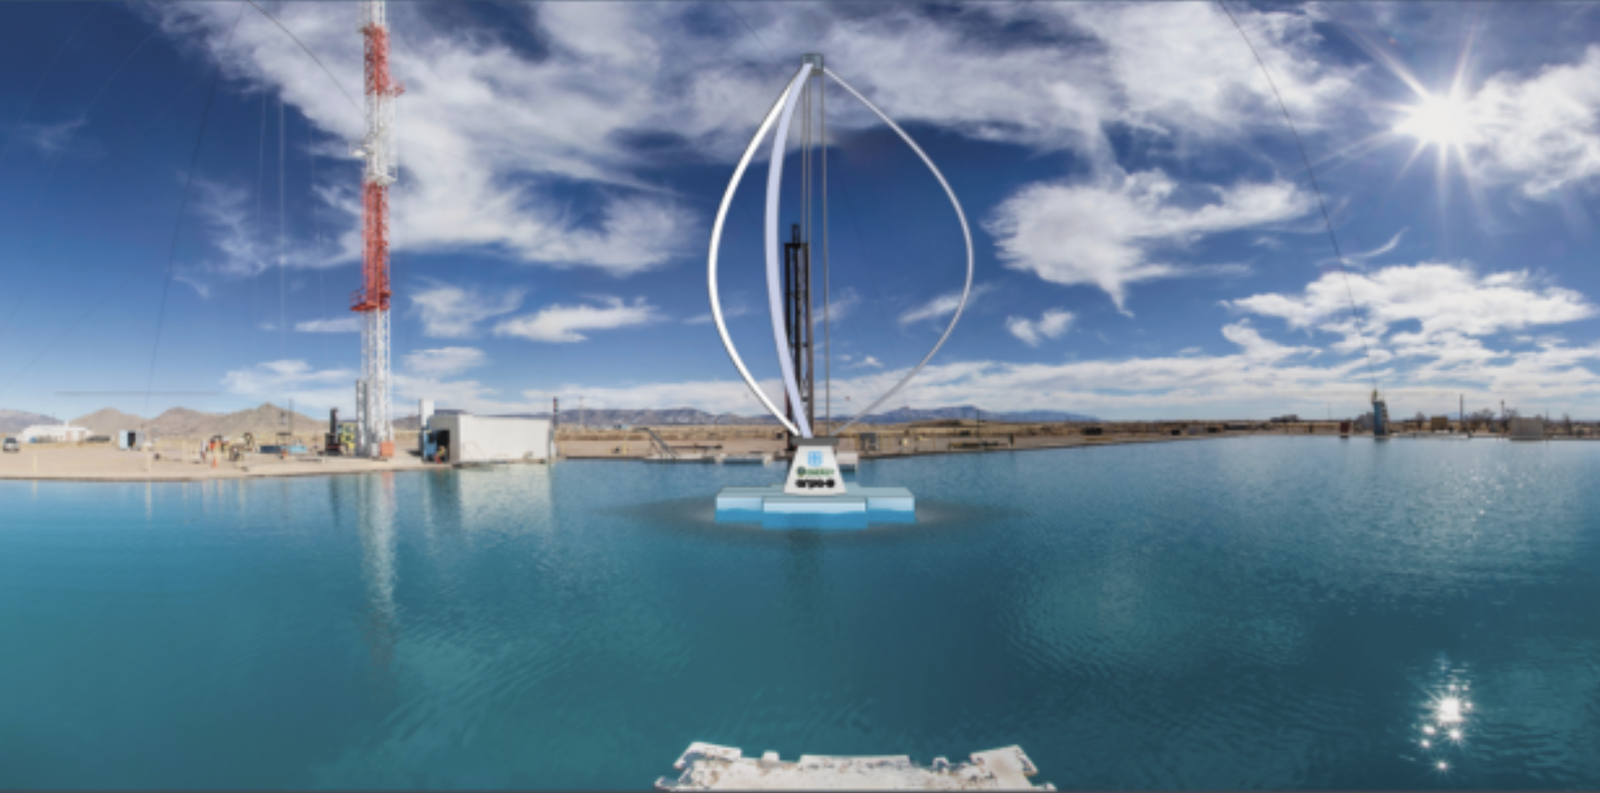 Instant Floating Offshore Wind Turbine: Just Remove Tower